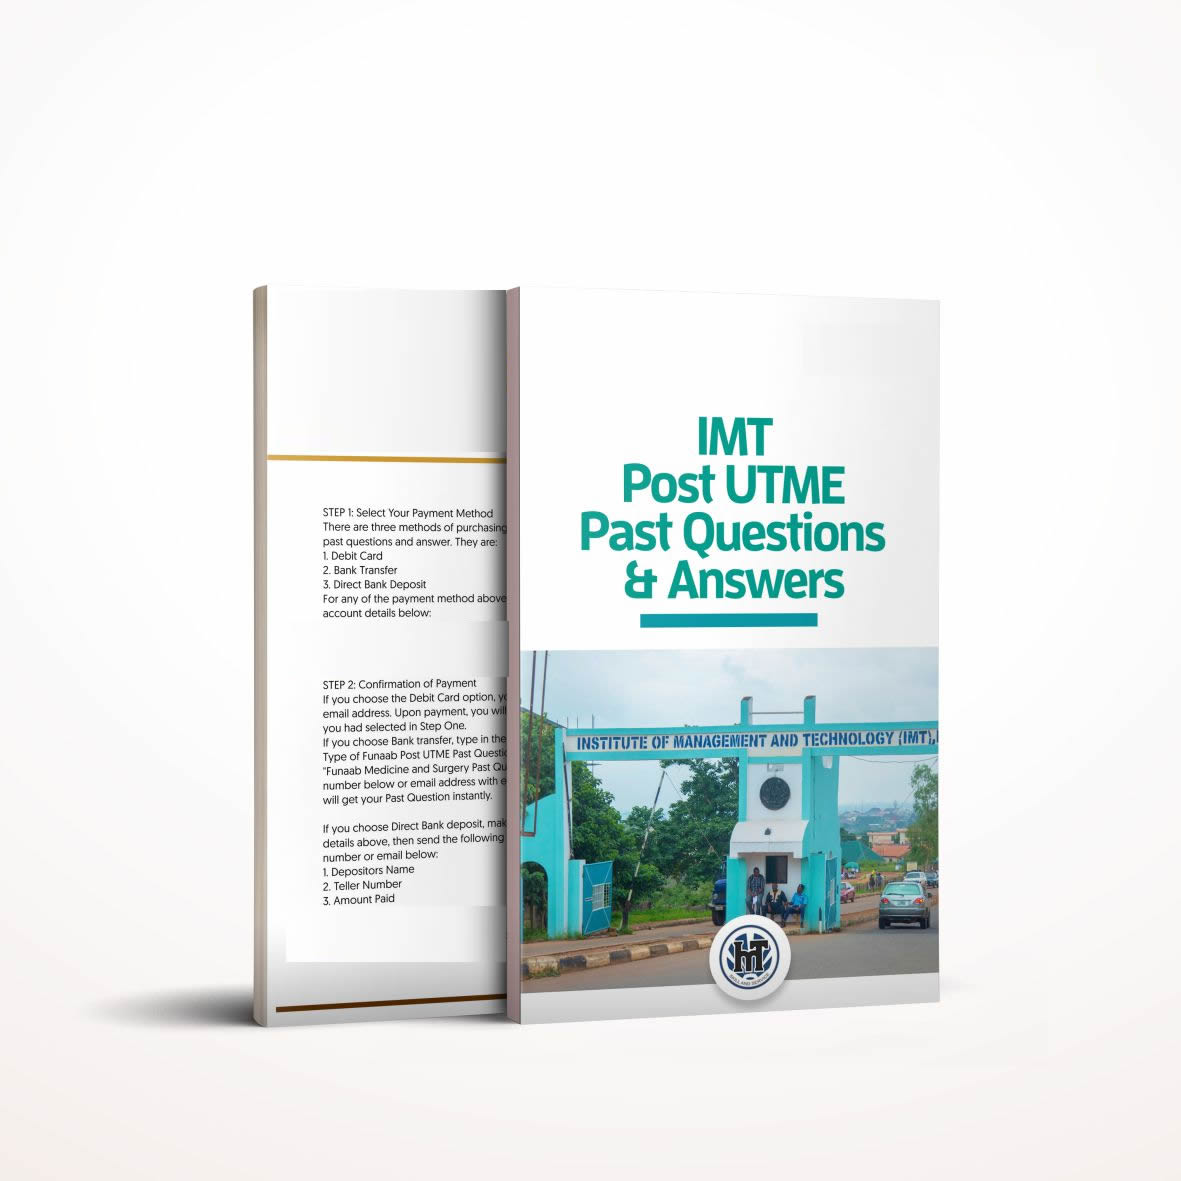 IMT post utme past questions and answers - Pdf